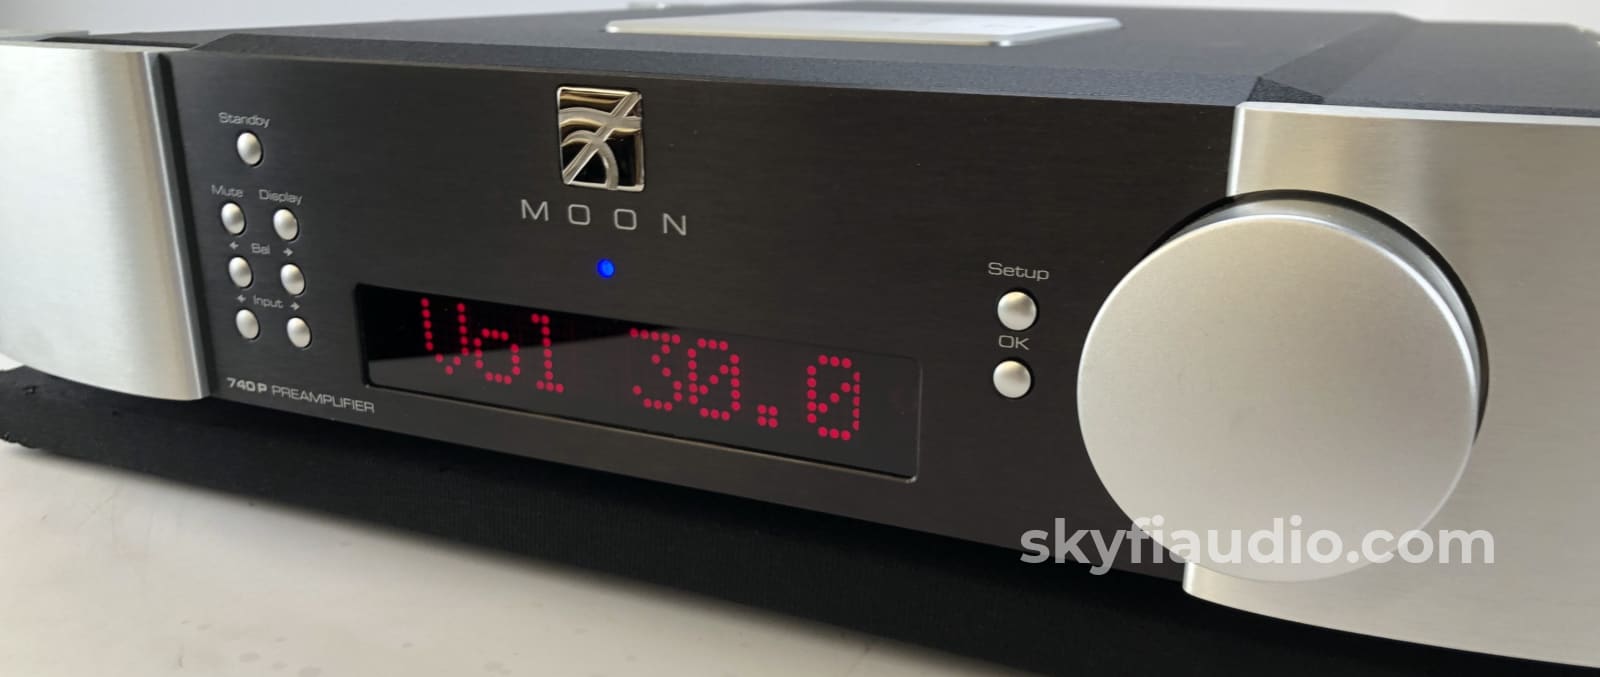 Simaudio Moon Evolution 740P Analog Preamplifier - Complete W/Remote Box And Manual